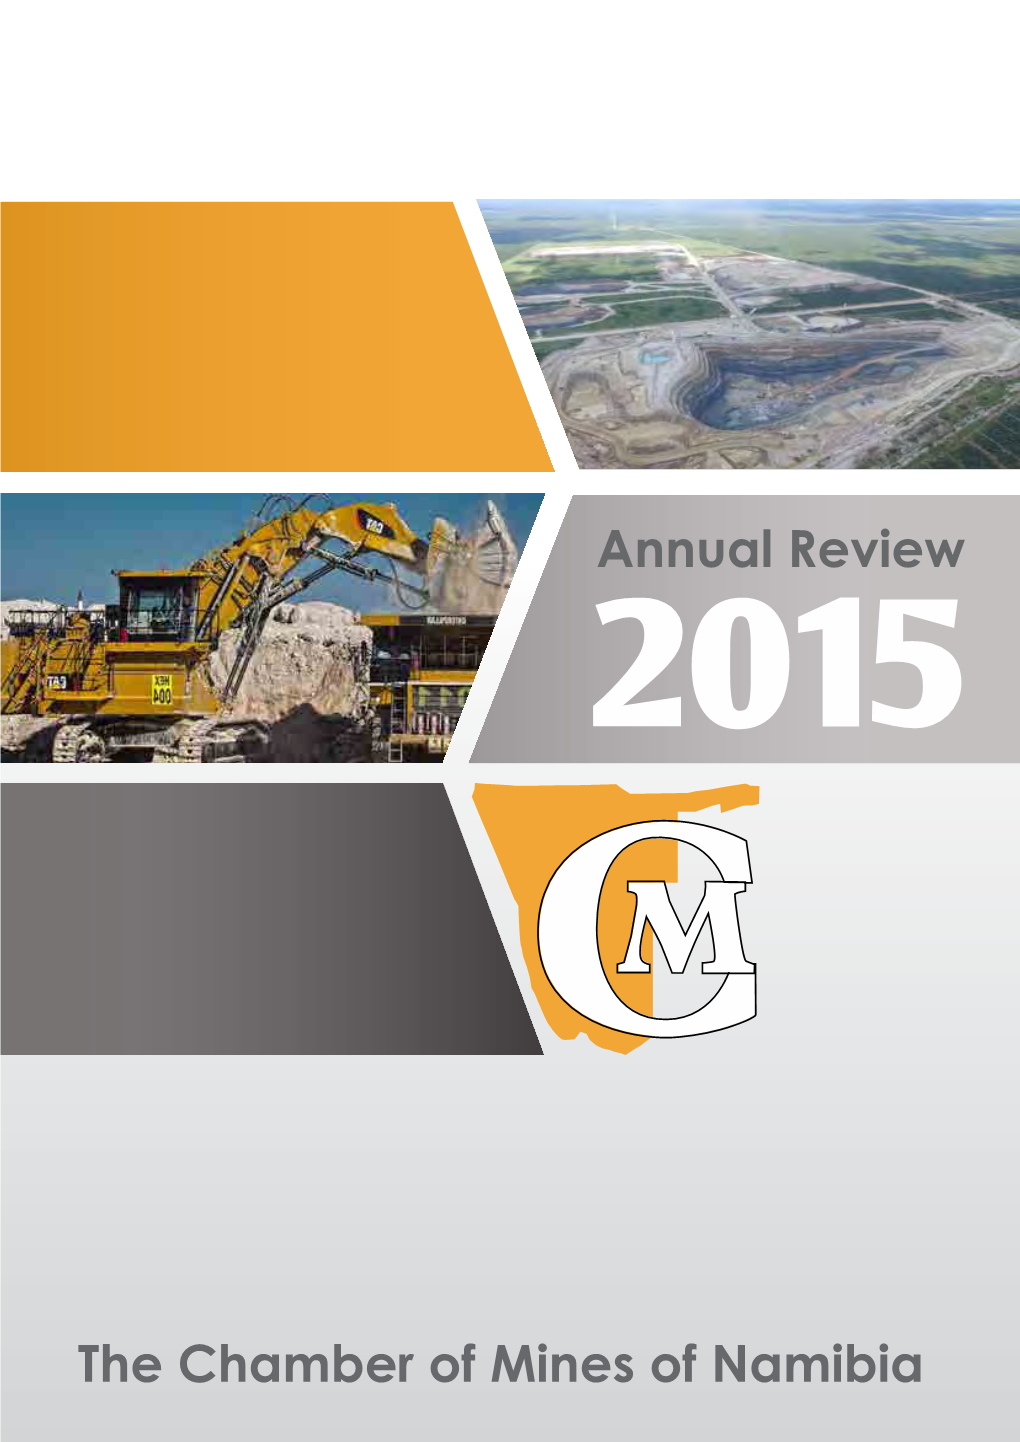 The Chamber of Mines of Namibia Annual Review